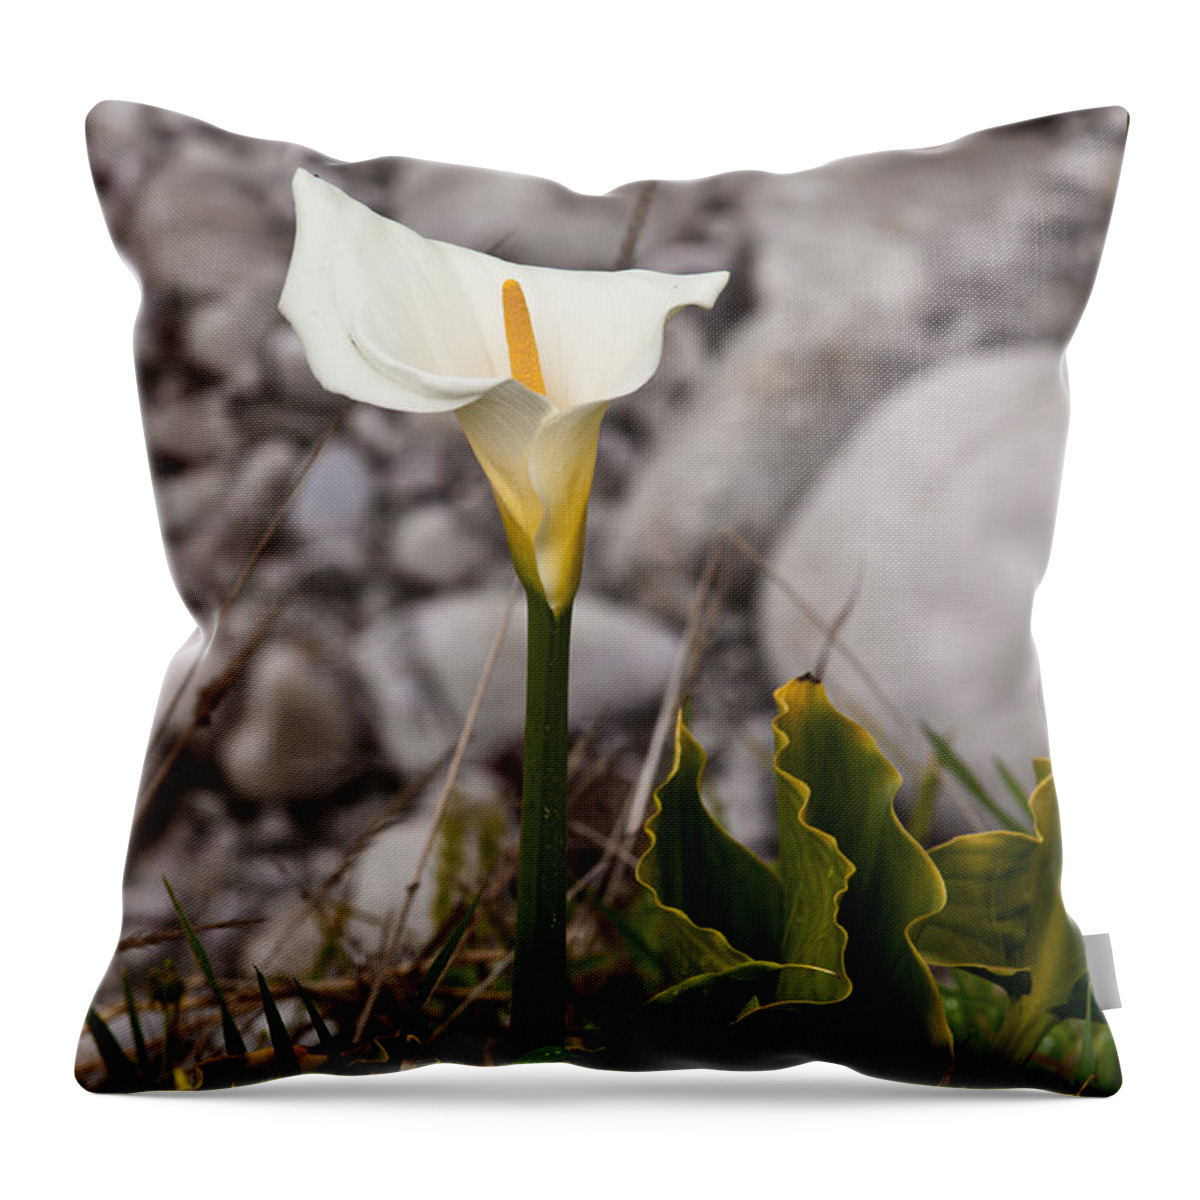 White Flower Throw Pillow featuring the photograph Lone Calla Lily by Melinda Ledsome